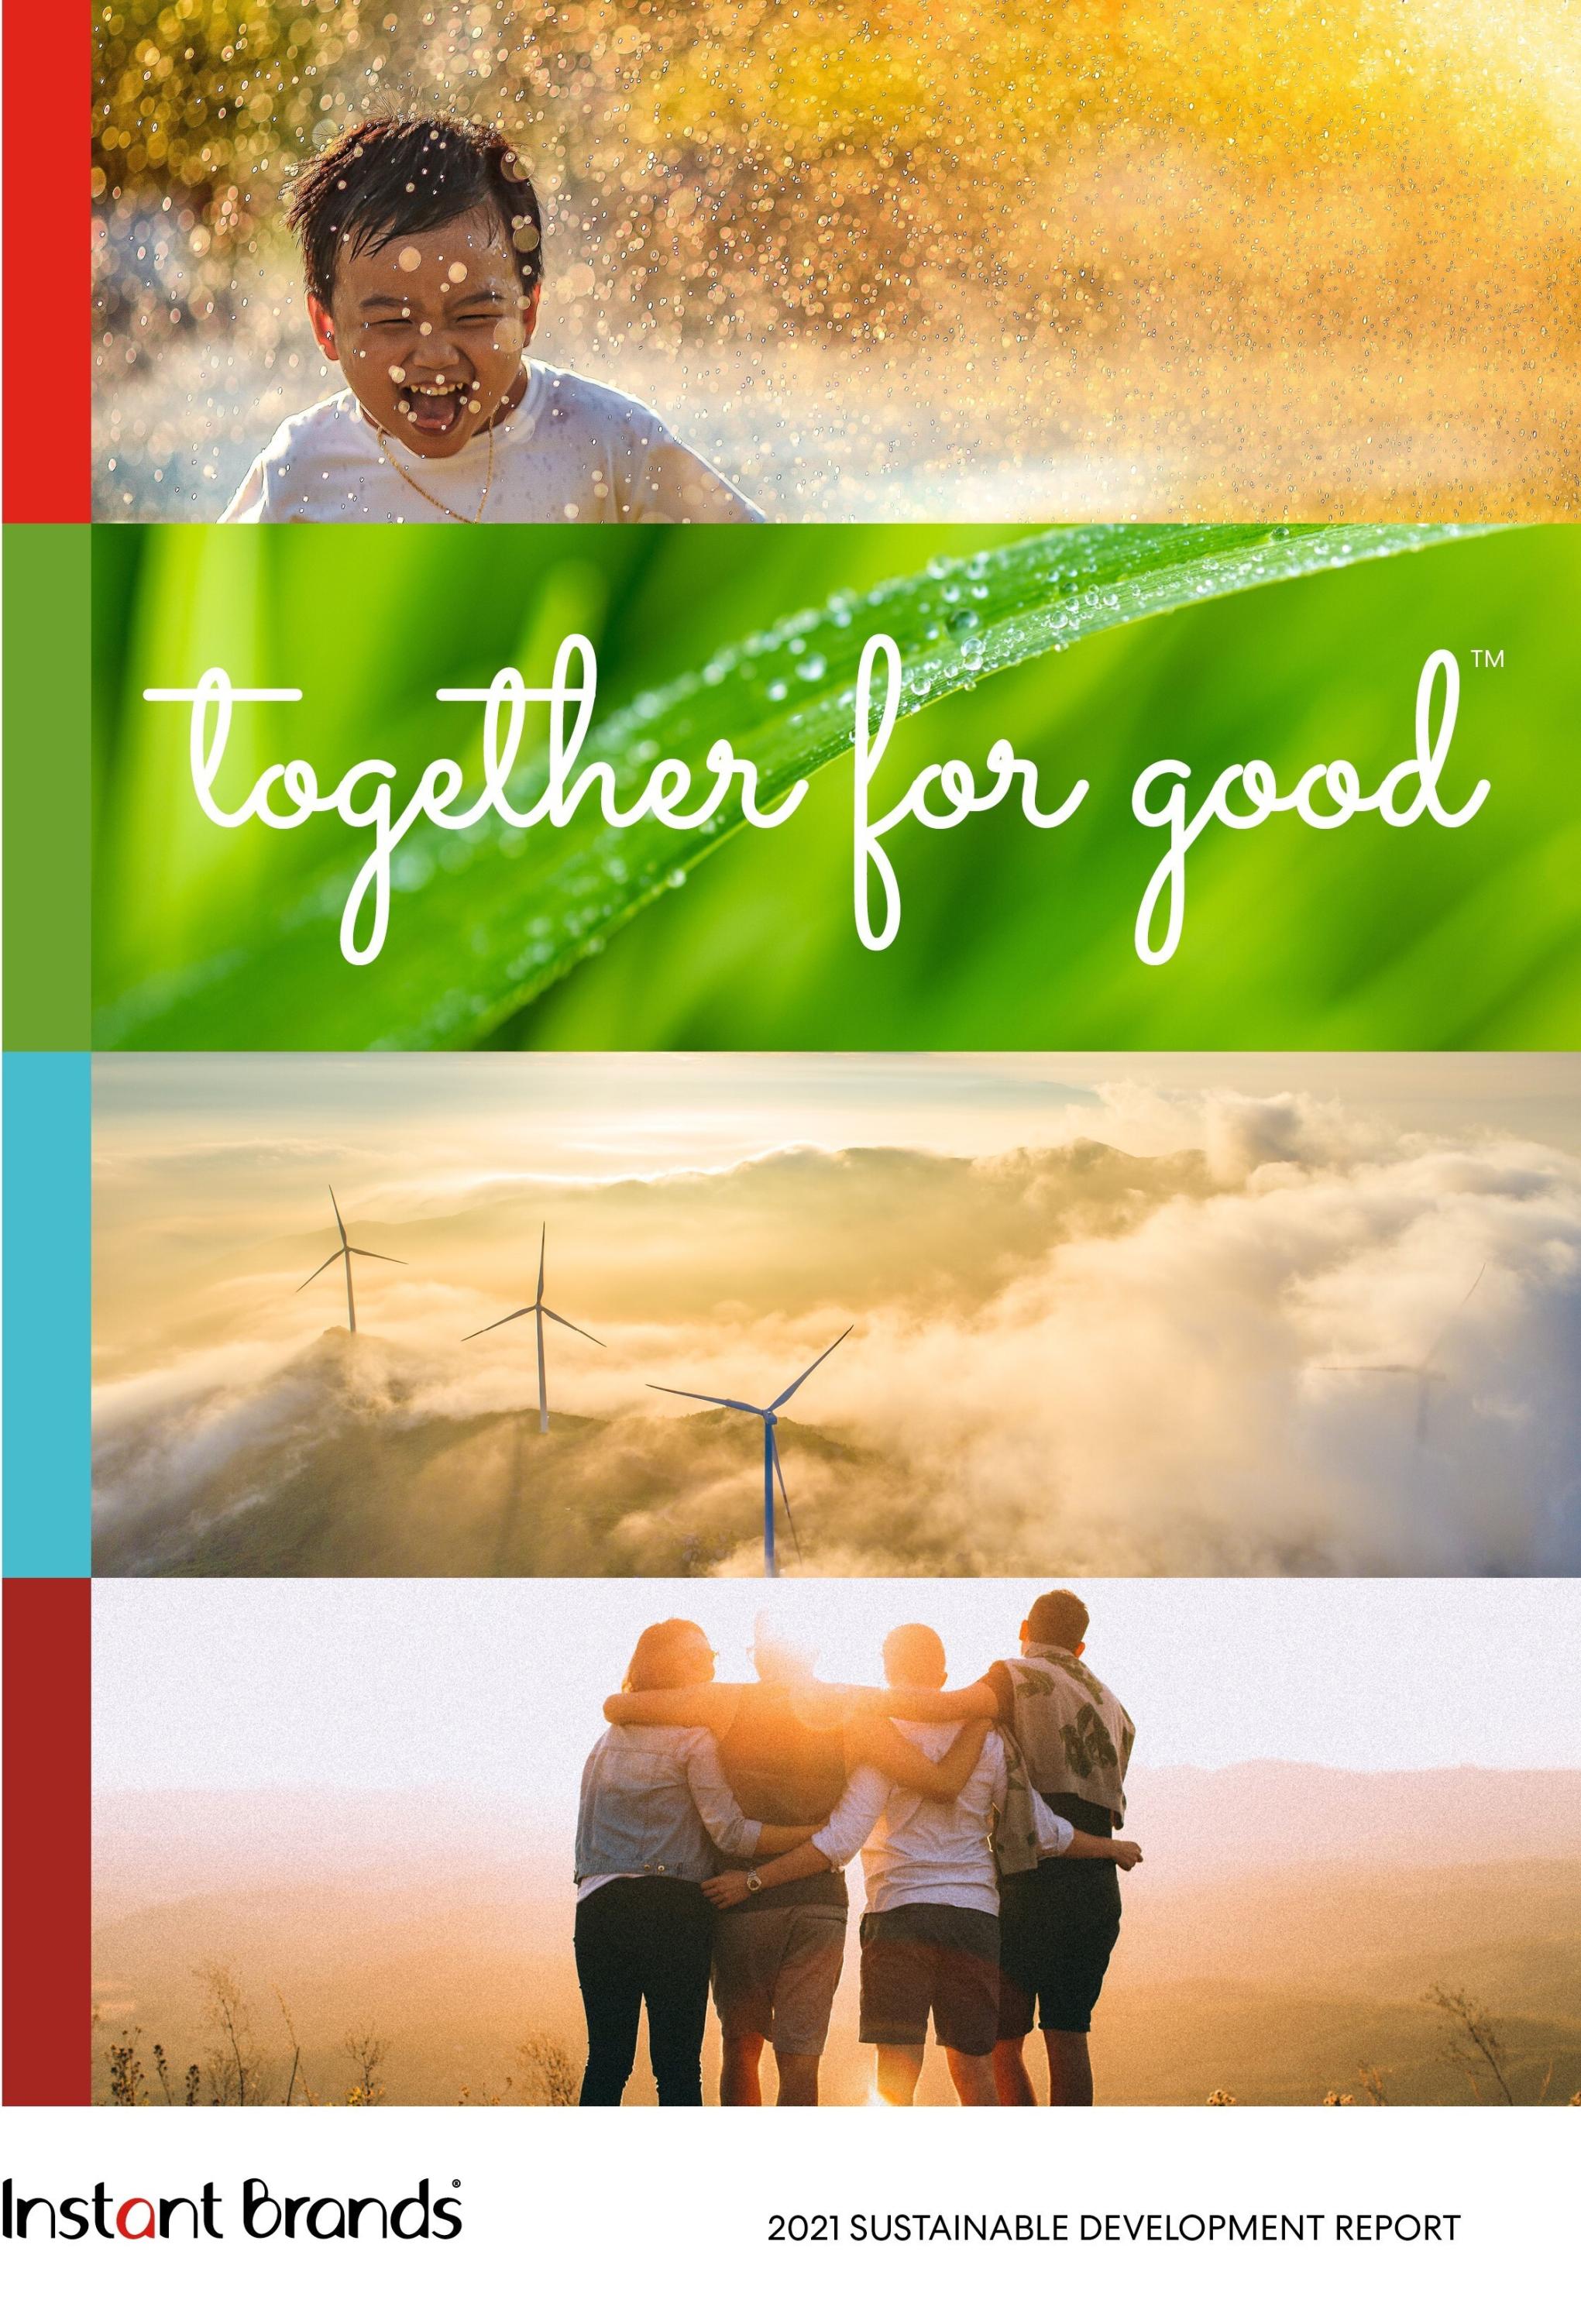 "Together for Good" with nature images